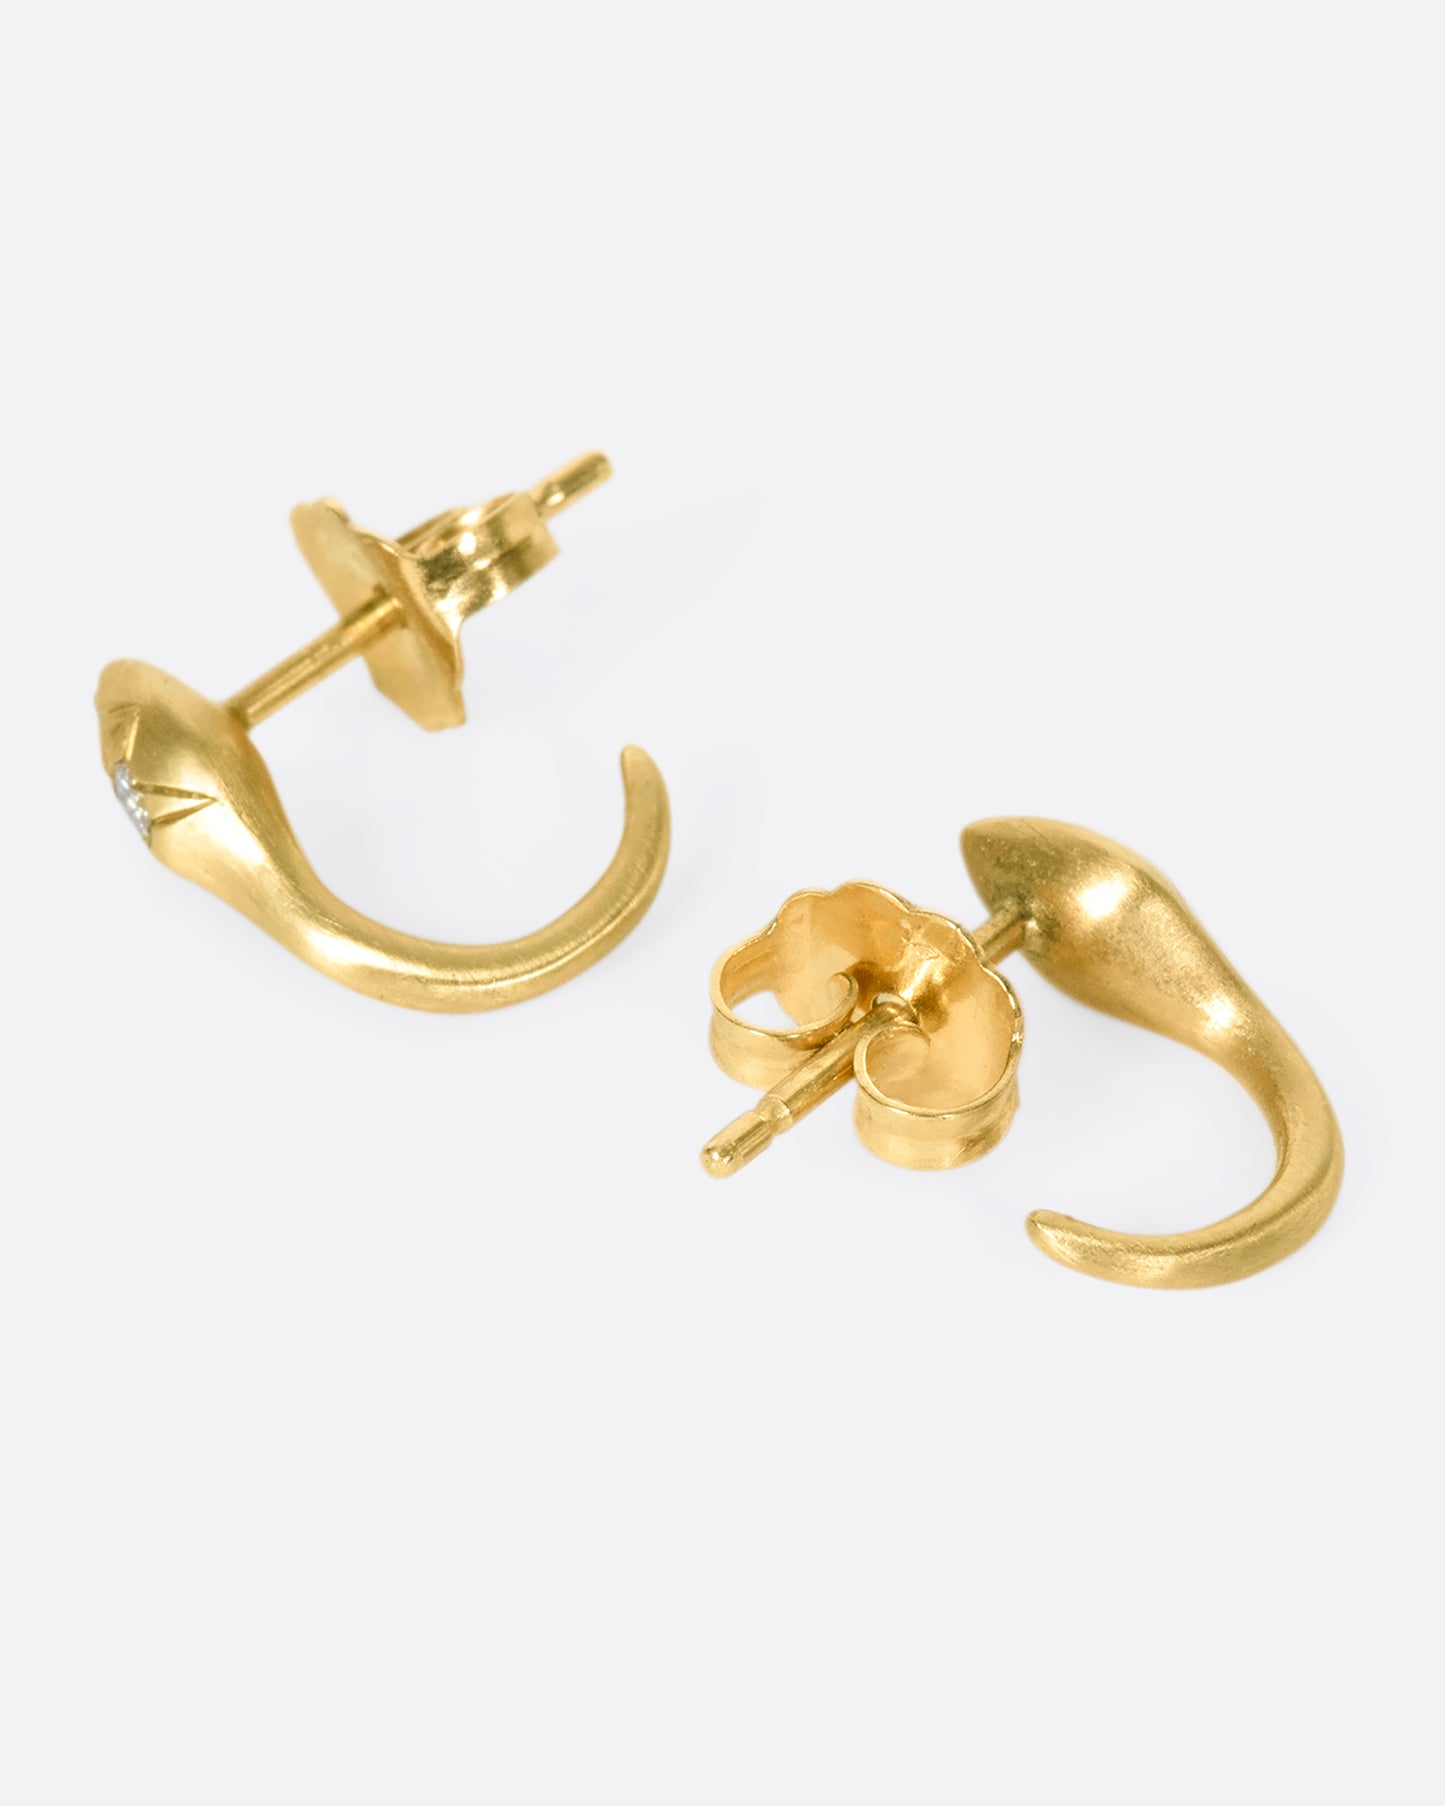 A pair of brushed 10k gold snakes that curl under your ear like tapered huggies